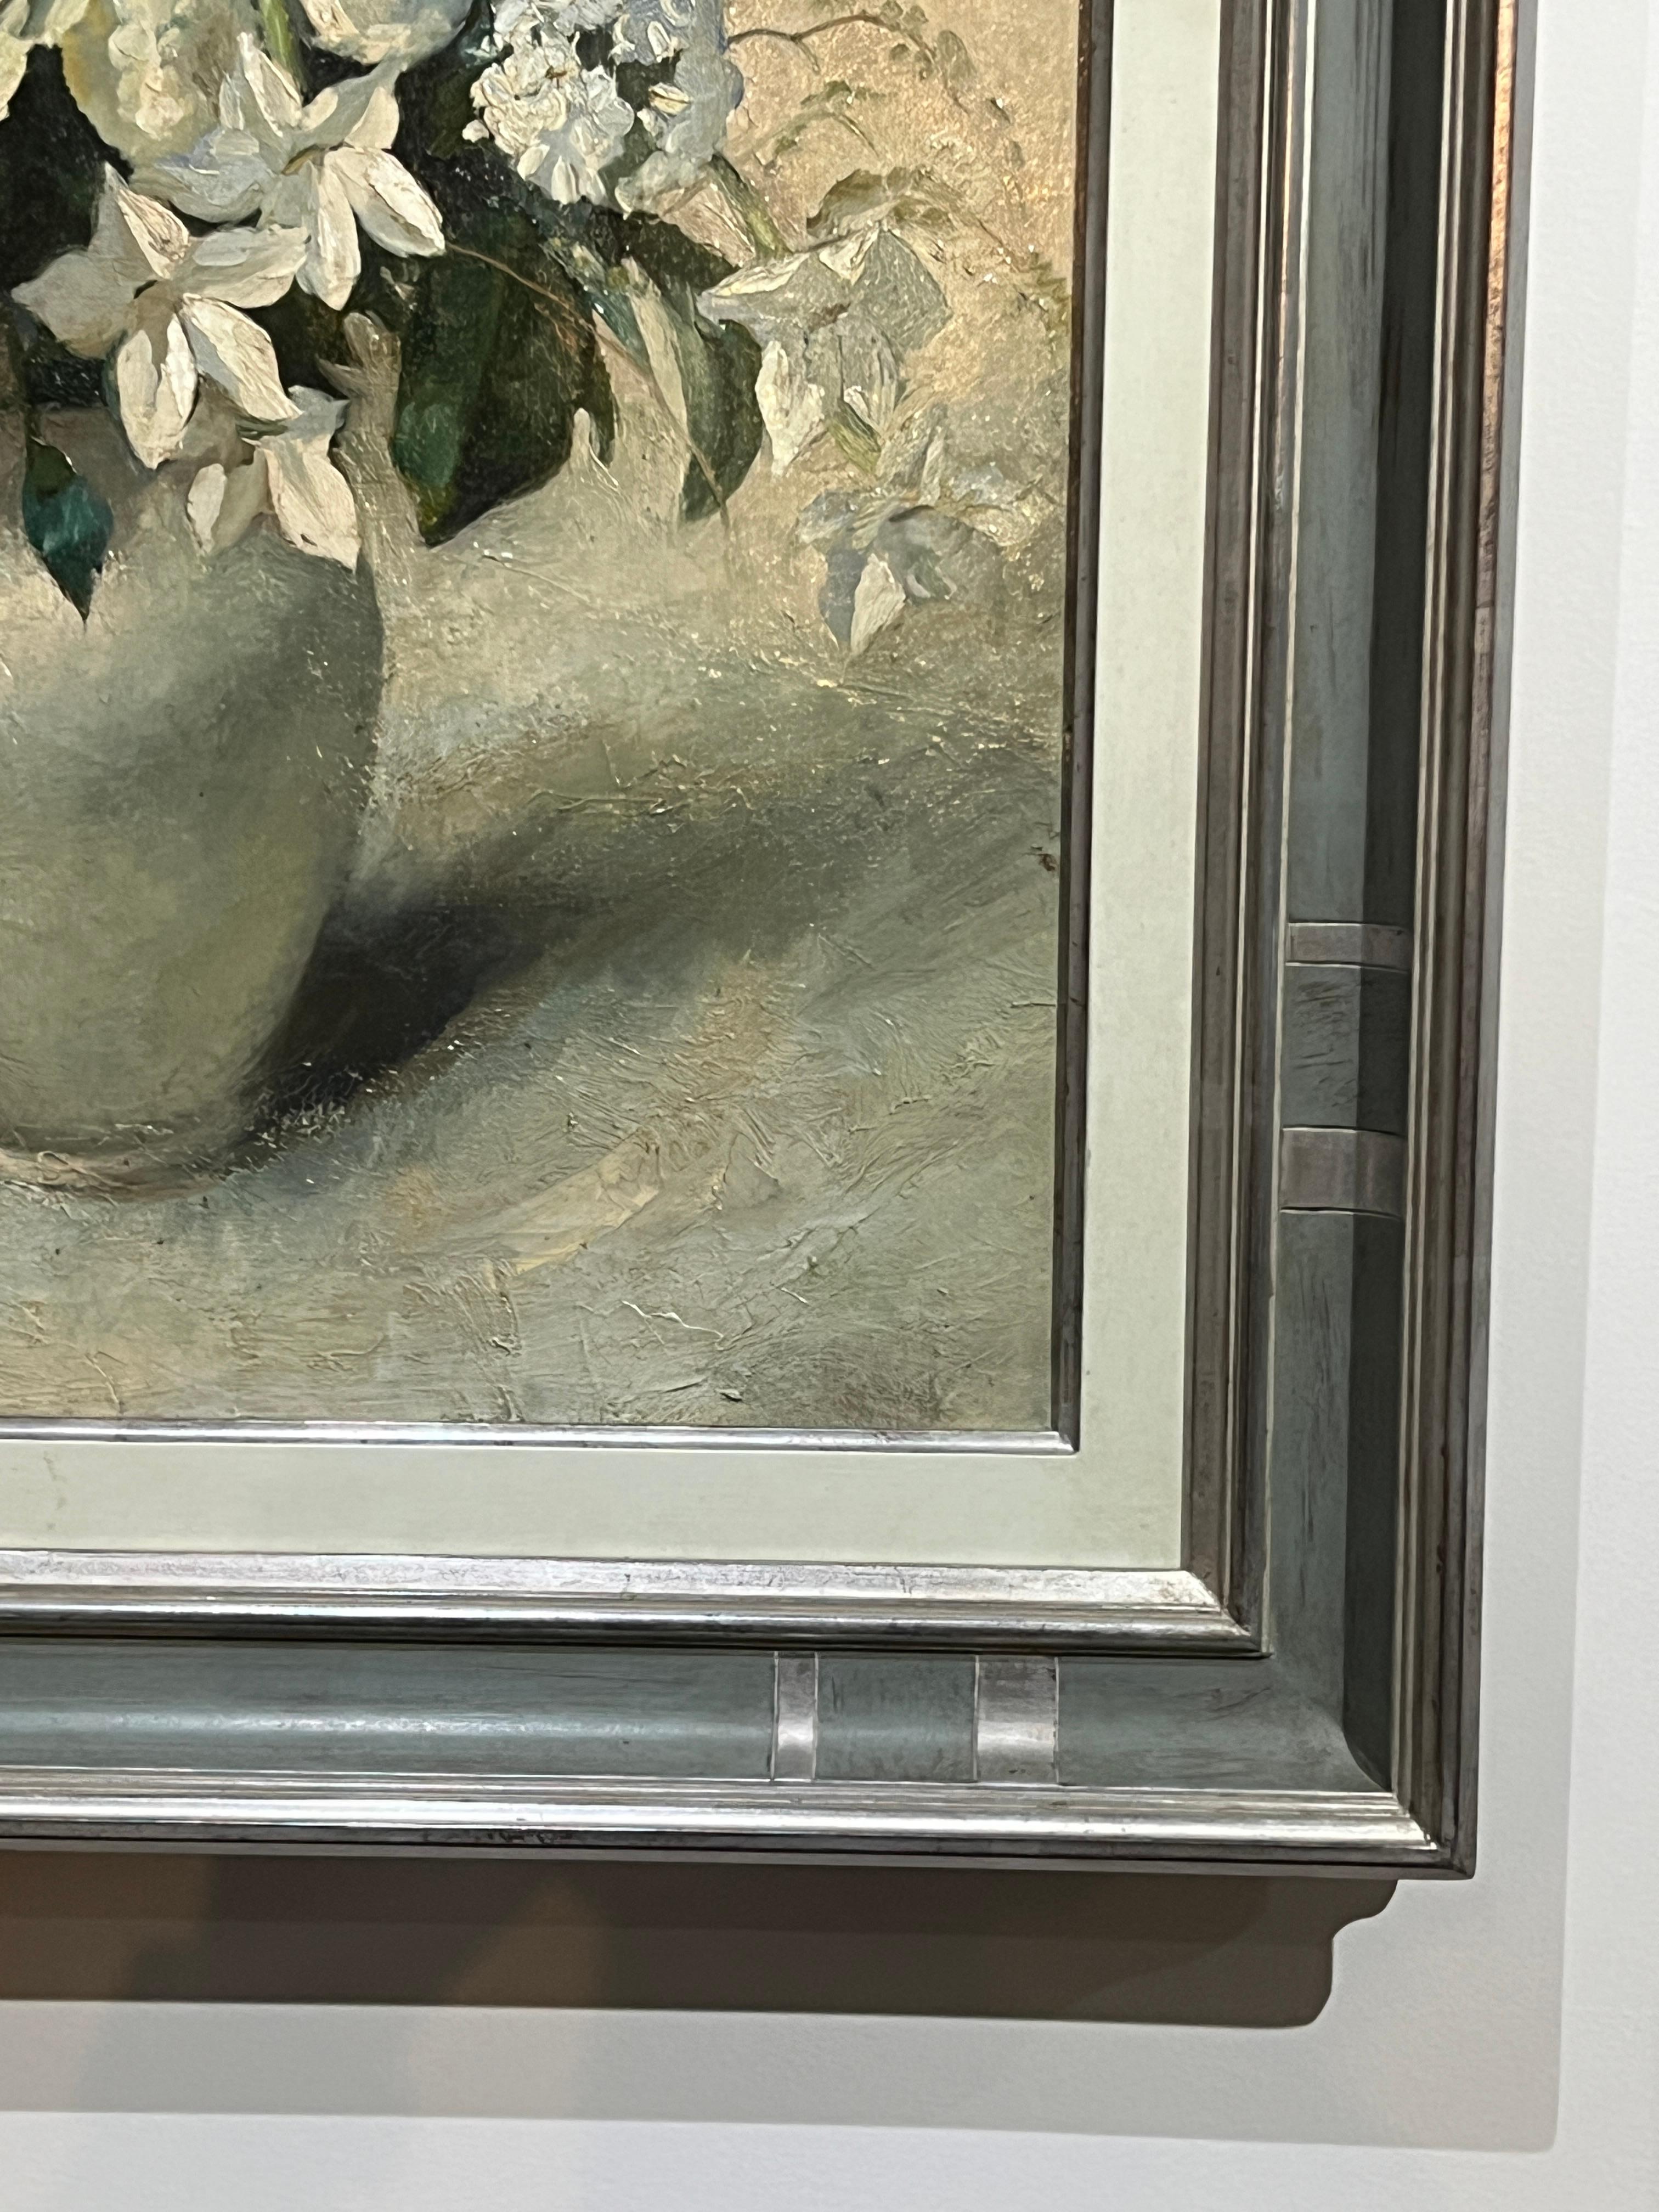 A white flower arrangement with green hues. Signed by Clément Serveau. Dated 1937.
Made in France This timeless oil on canvas, created by Clement Servenau in 1937, is a captivating work of art. The painting features a delicate bouquet of white